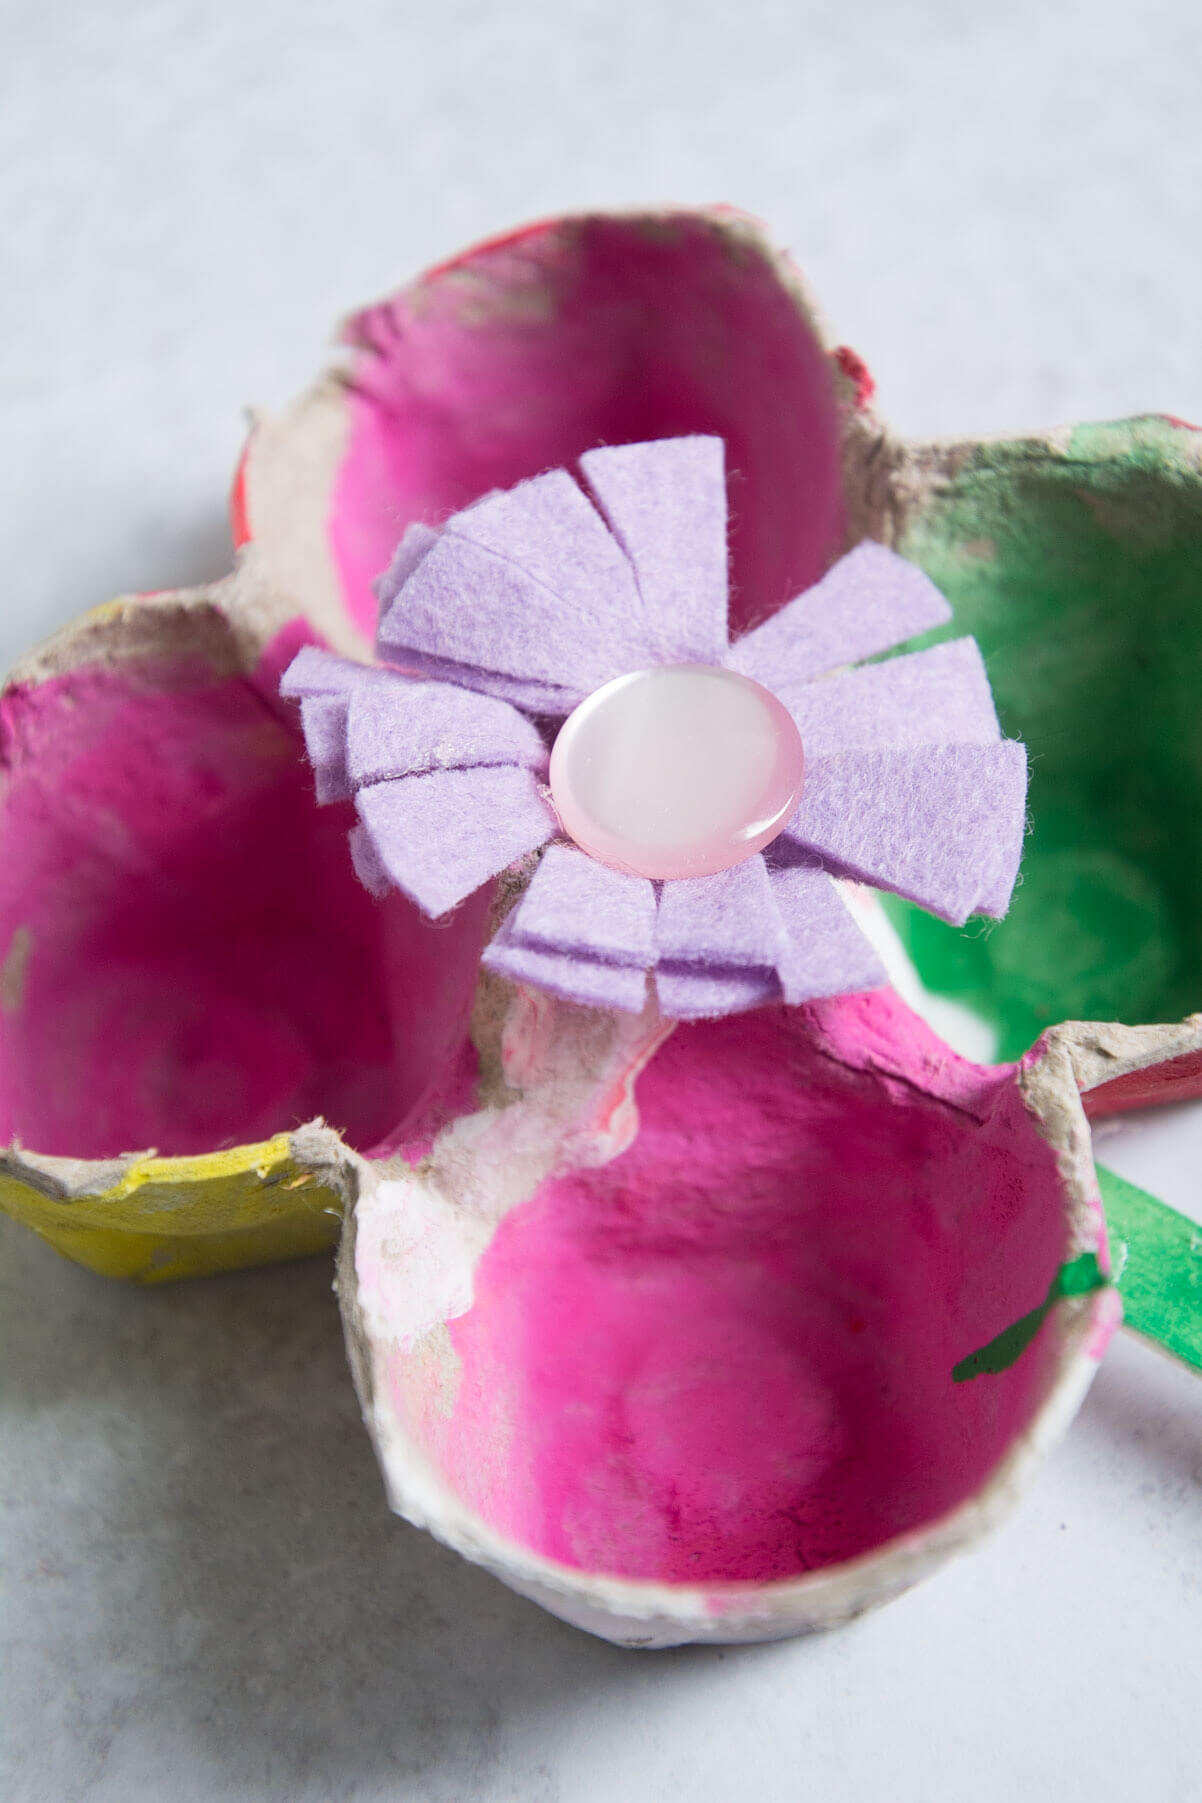 zoomed in view of egg carton flower craft with felt and button.